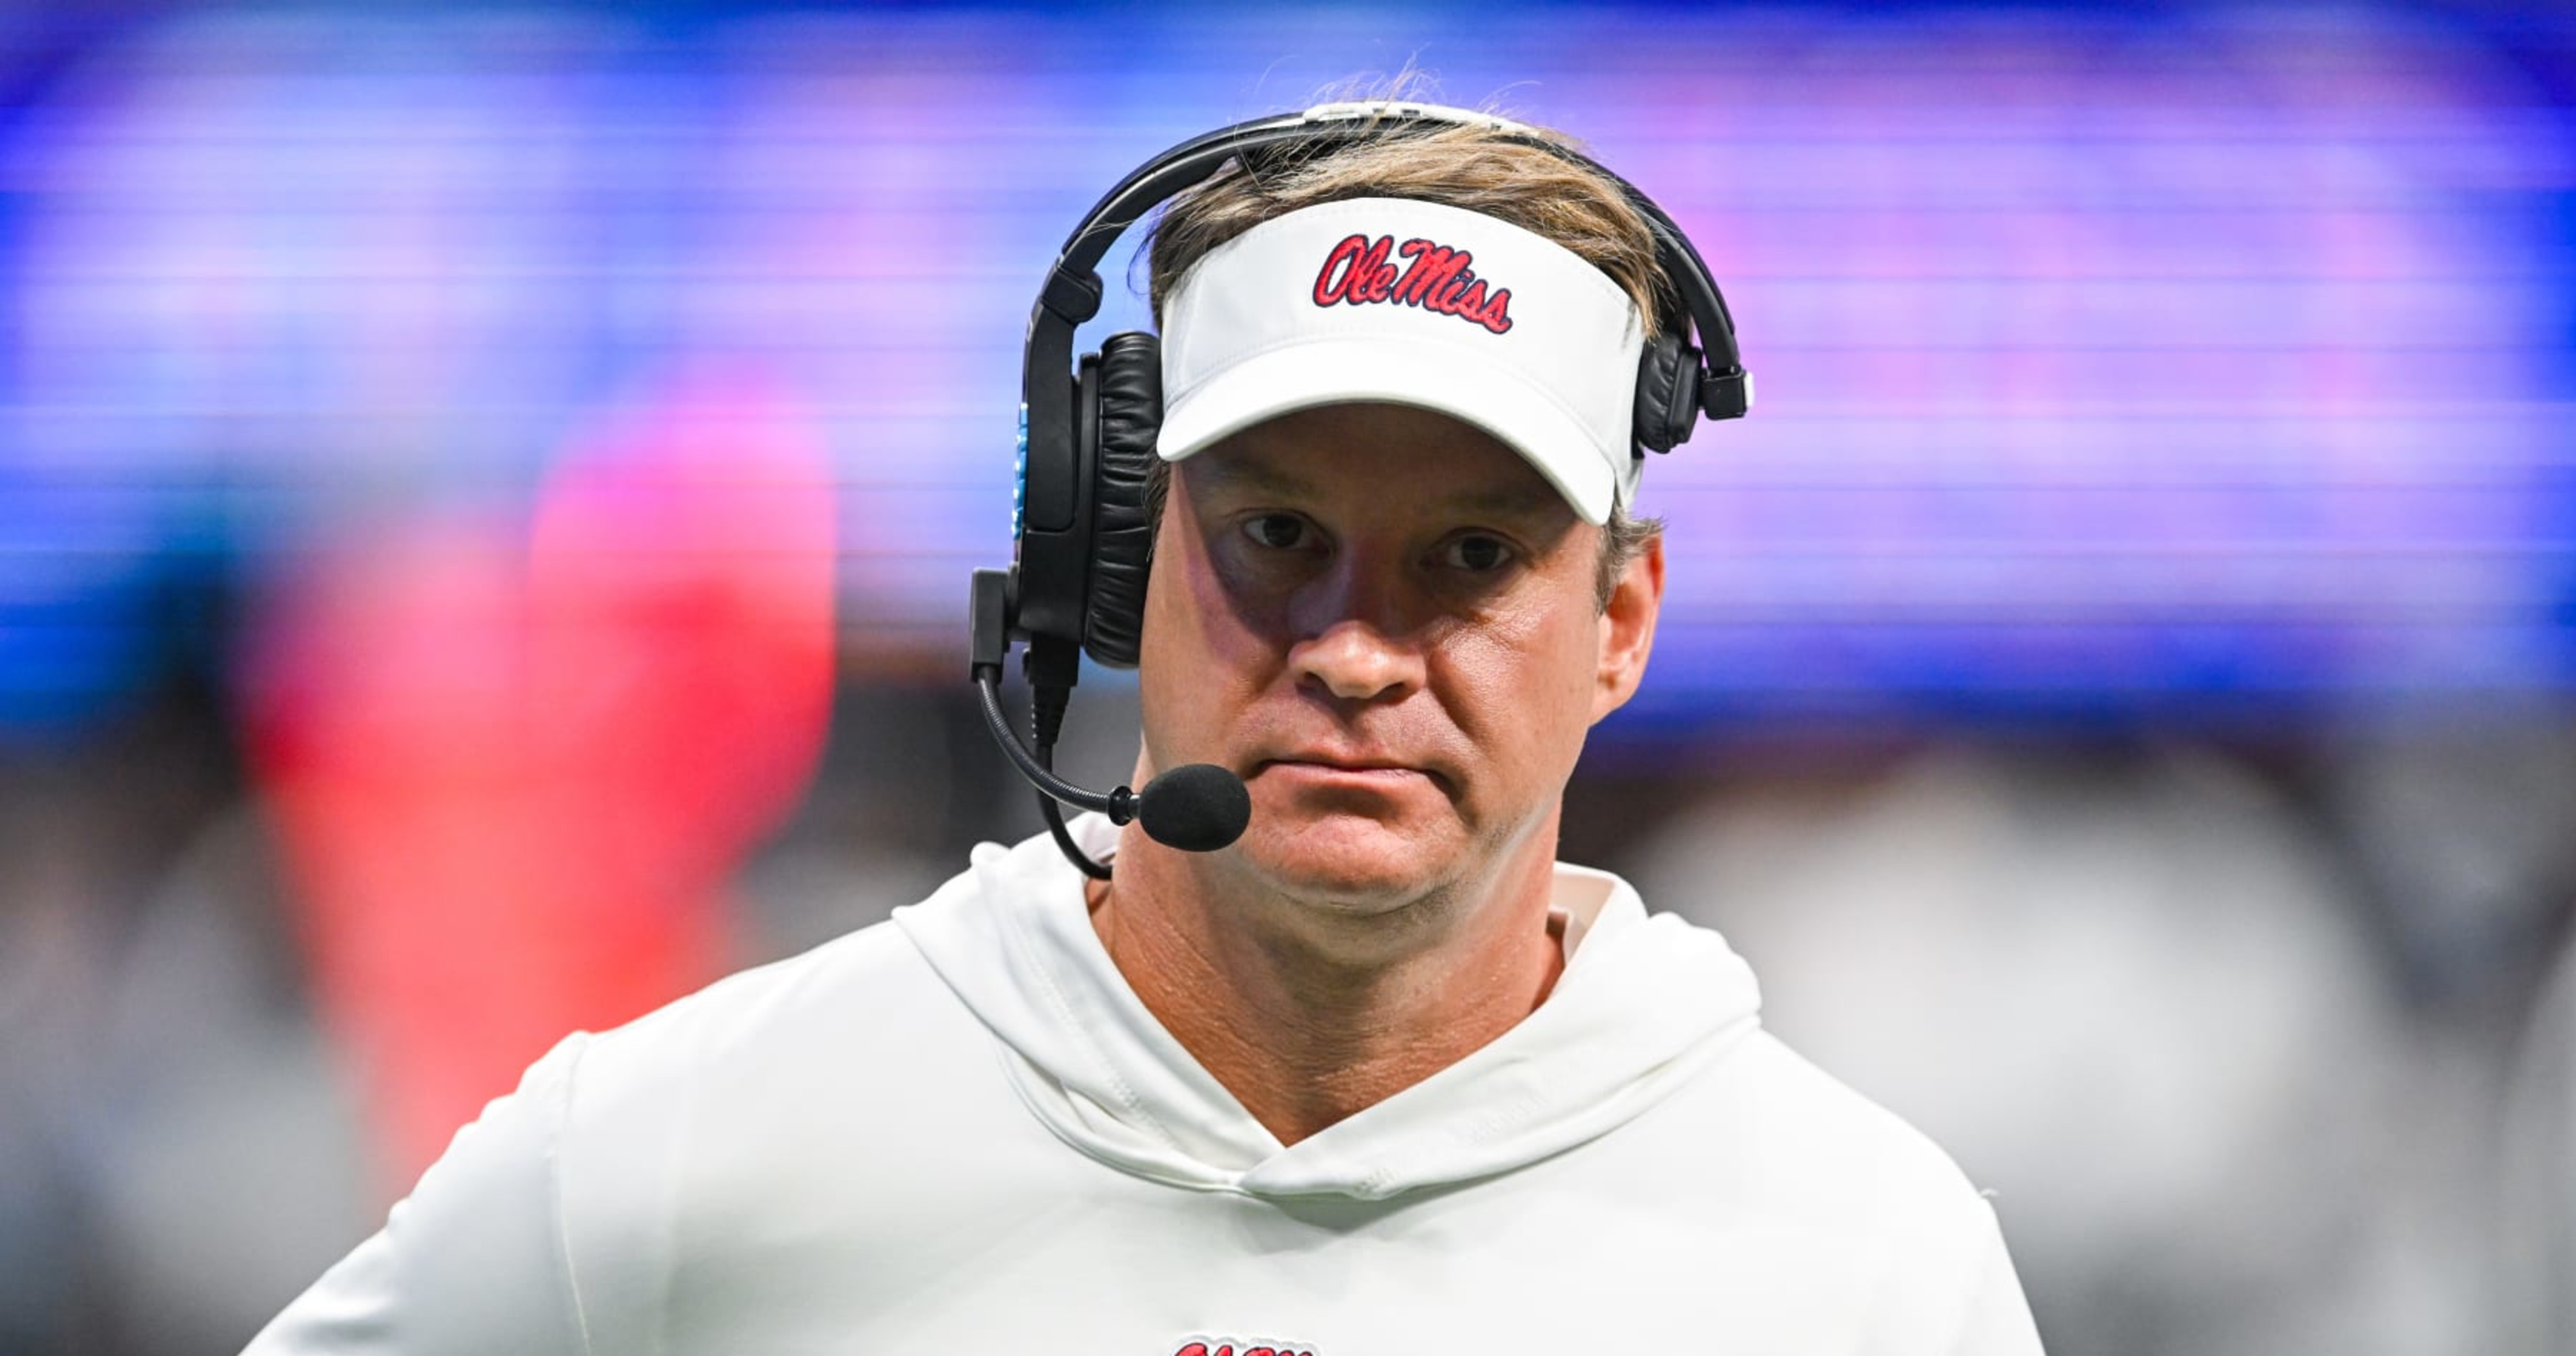 Lane Kiffin Wishes Tennessee 'Good Luck' in CWS After Game 1 Loss vs. Texas A&M